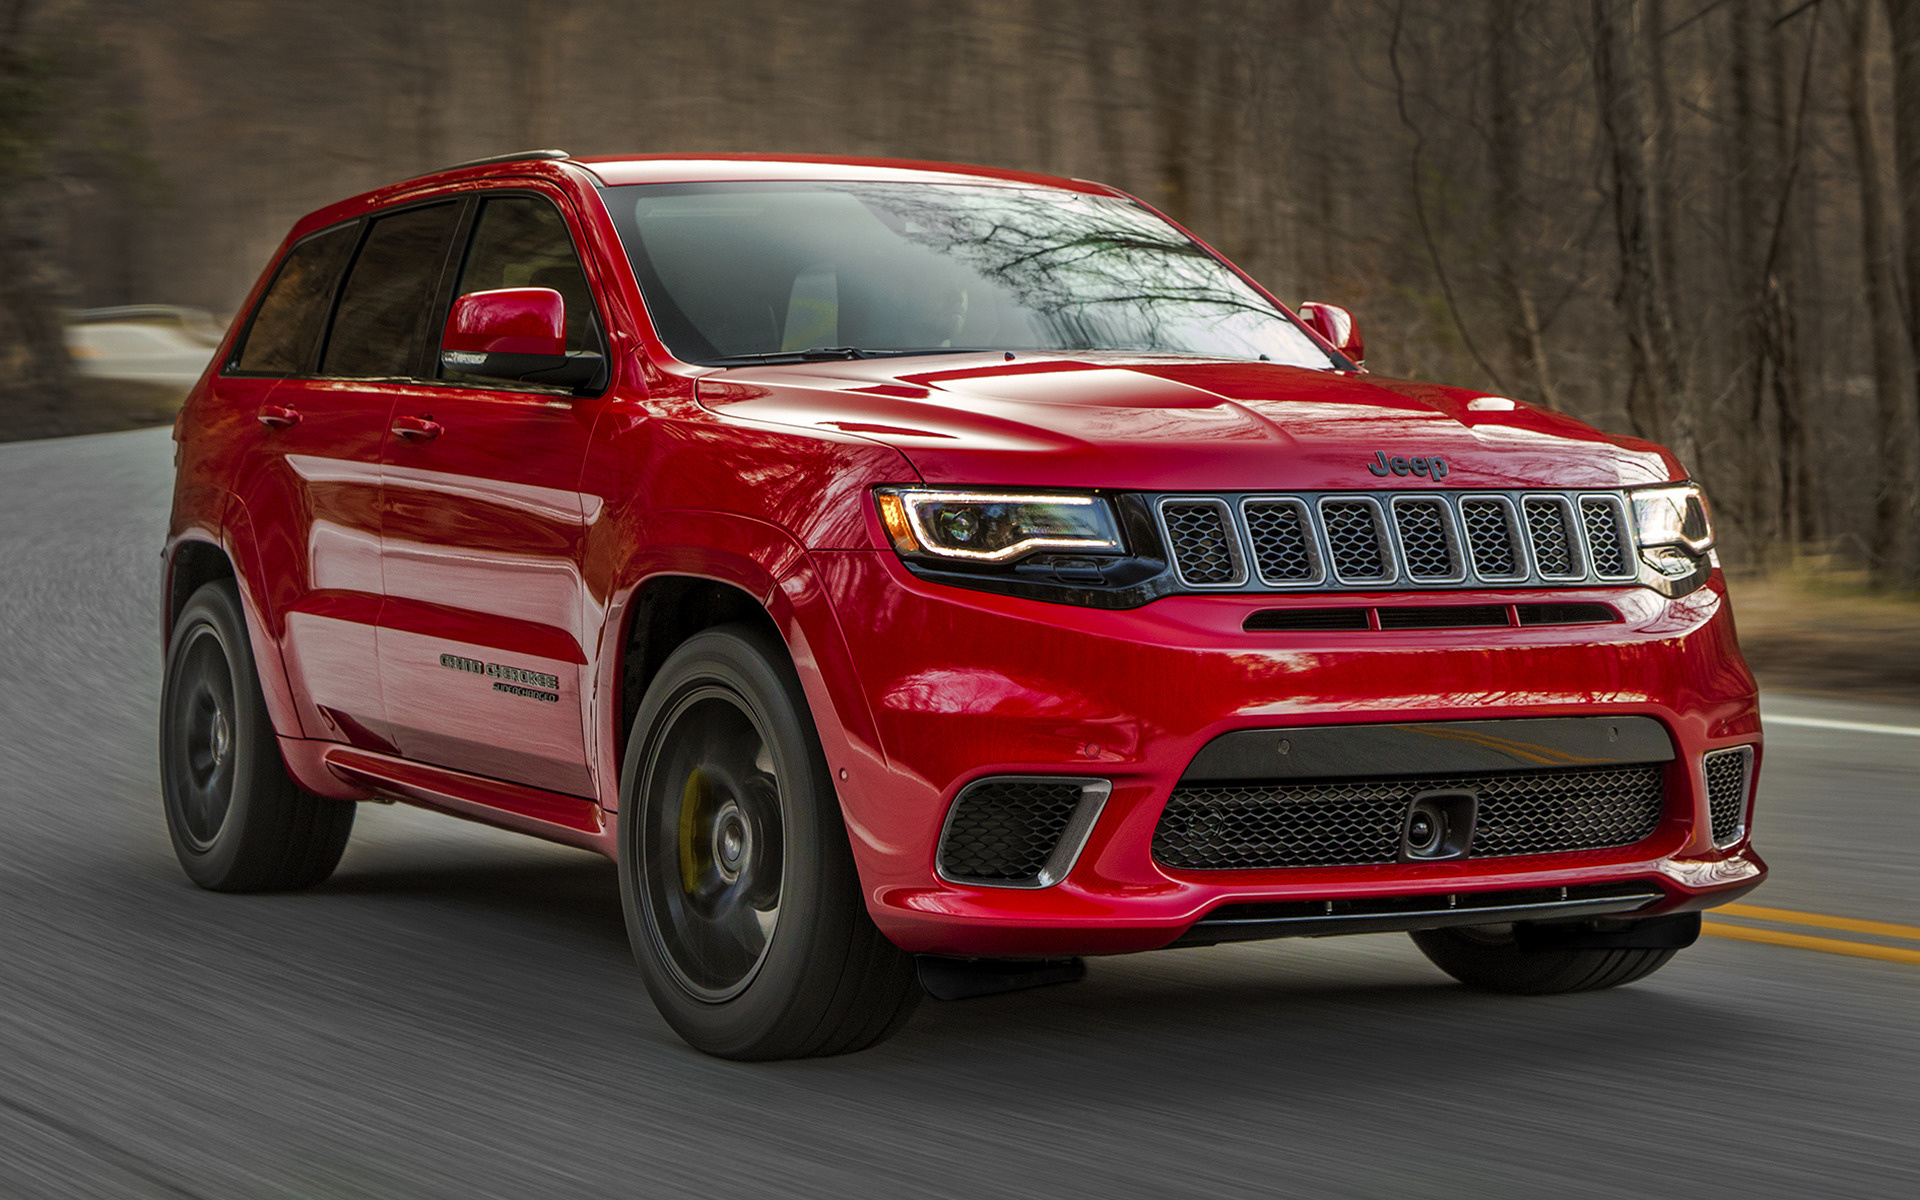 2018 Jeep Grand Cherokee Trackhawk - Wallpapers and HD Images | Car Pixel 2005 Jeep Grand Cherokee 5.7 Hemi Transmission Fluid